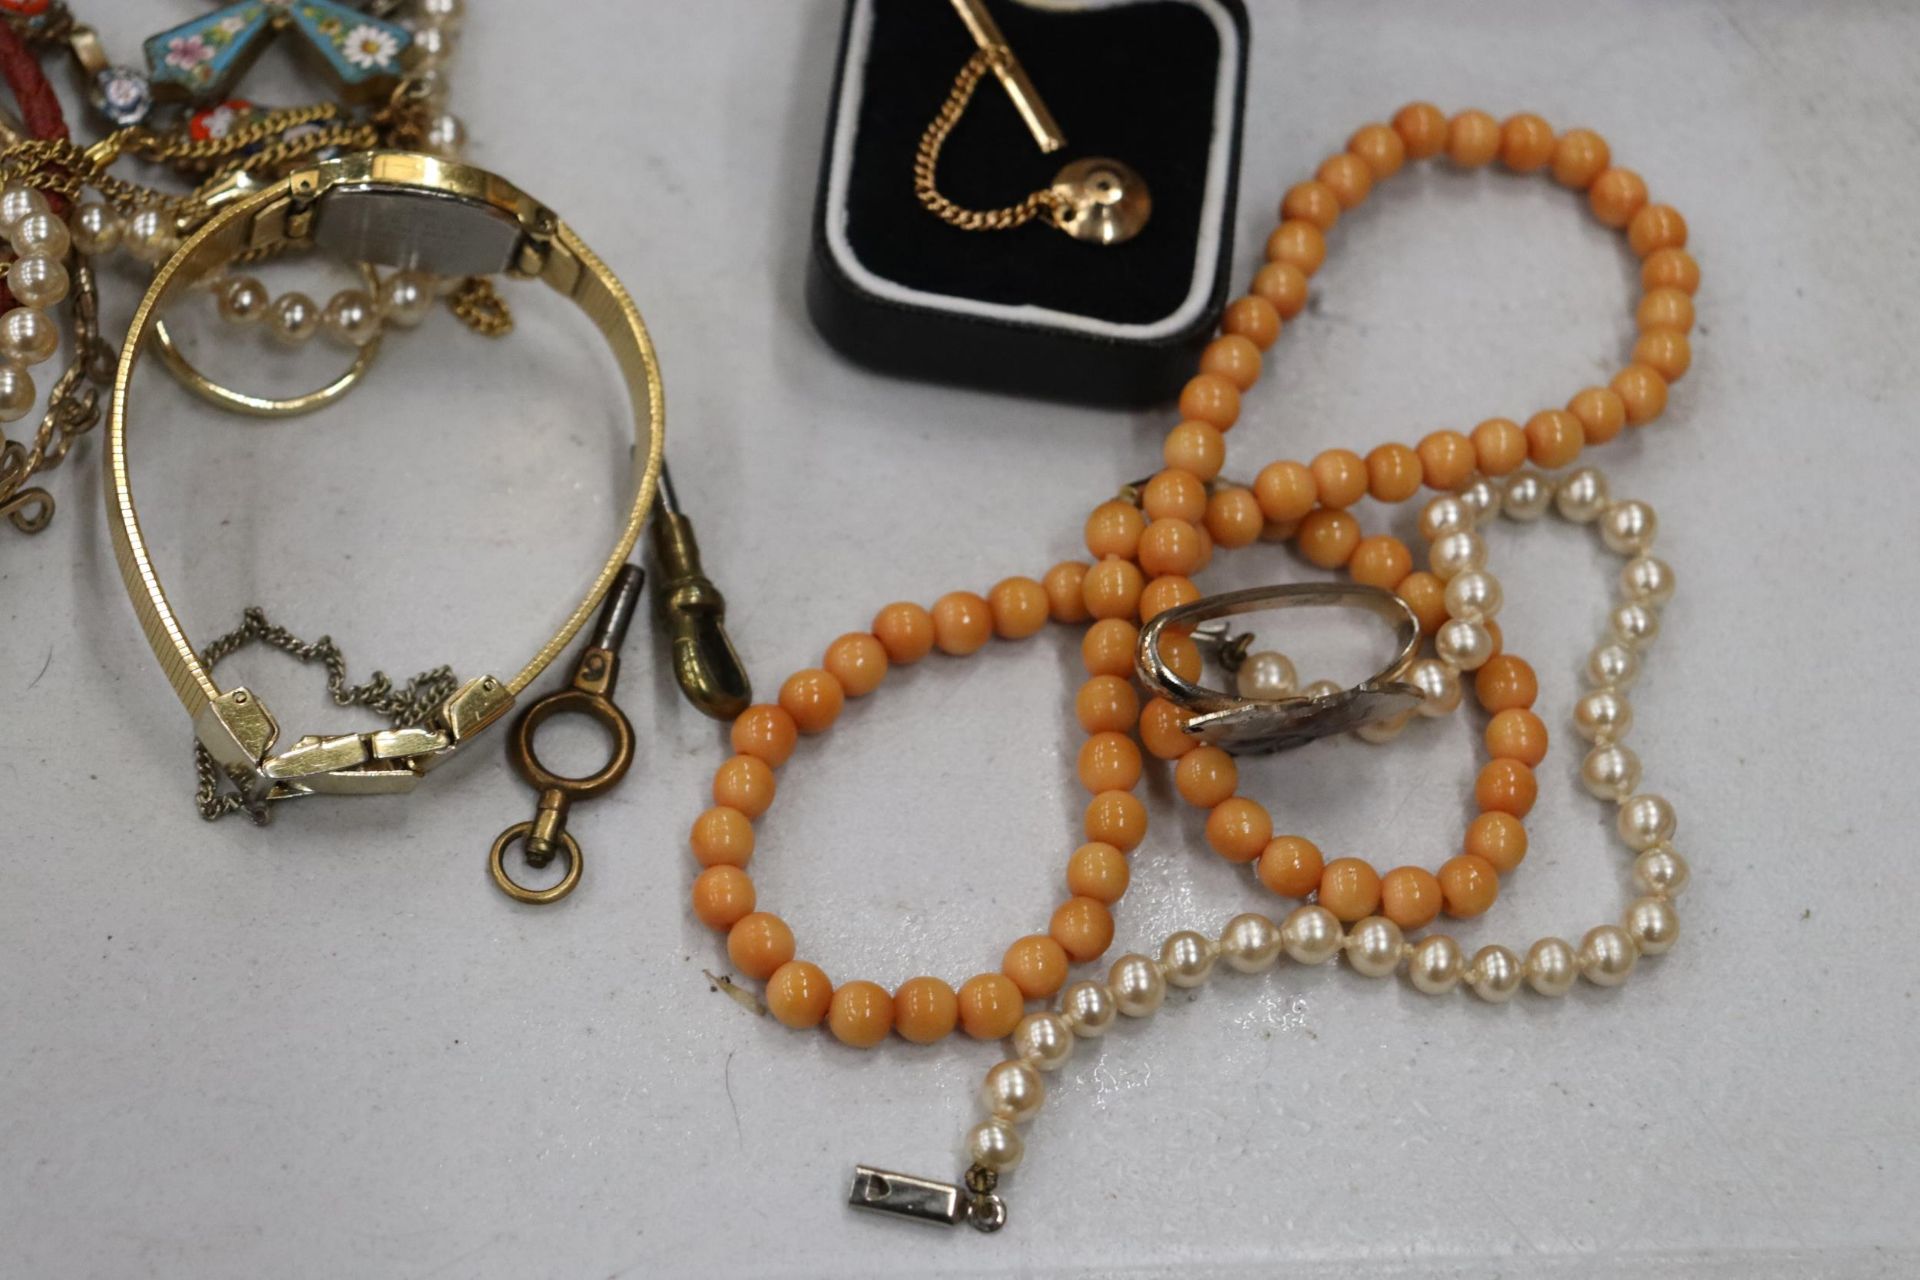 A QUANTITY OF COSTUME JEWELLERY TO INCLUDE BRACELETS, BOXED CUFFLINKS, A WATCH, PENKNIFE, ETC - Image 8 of 9